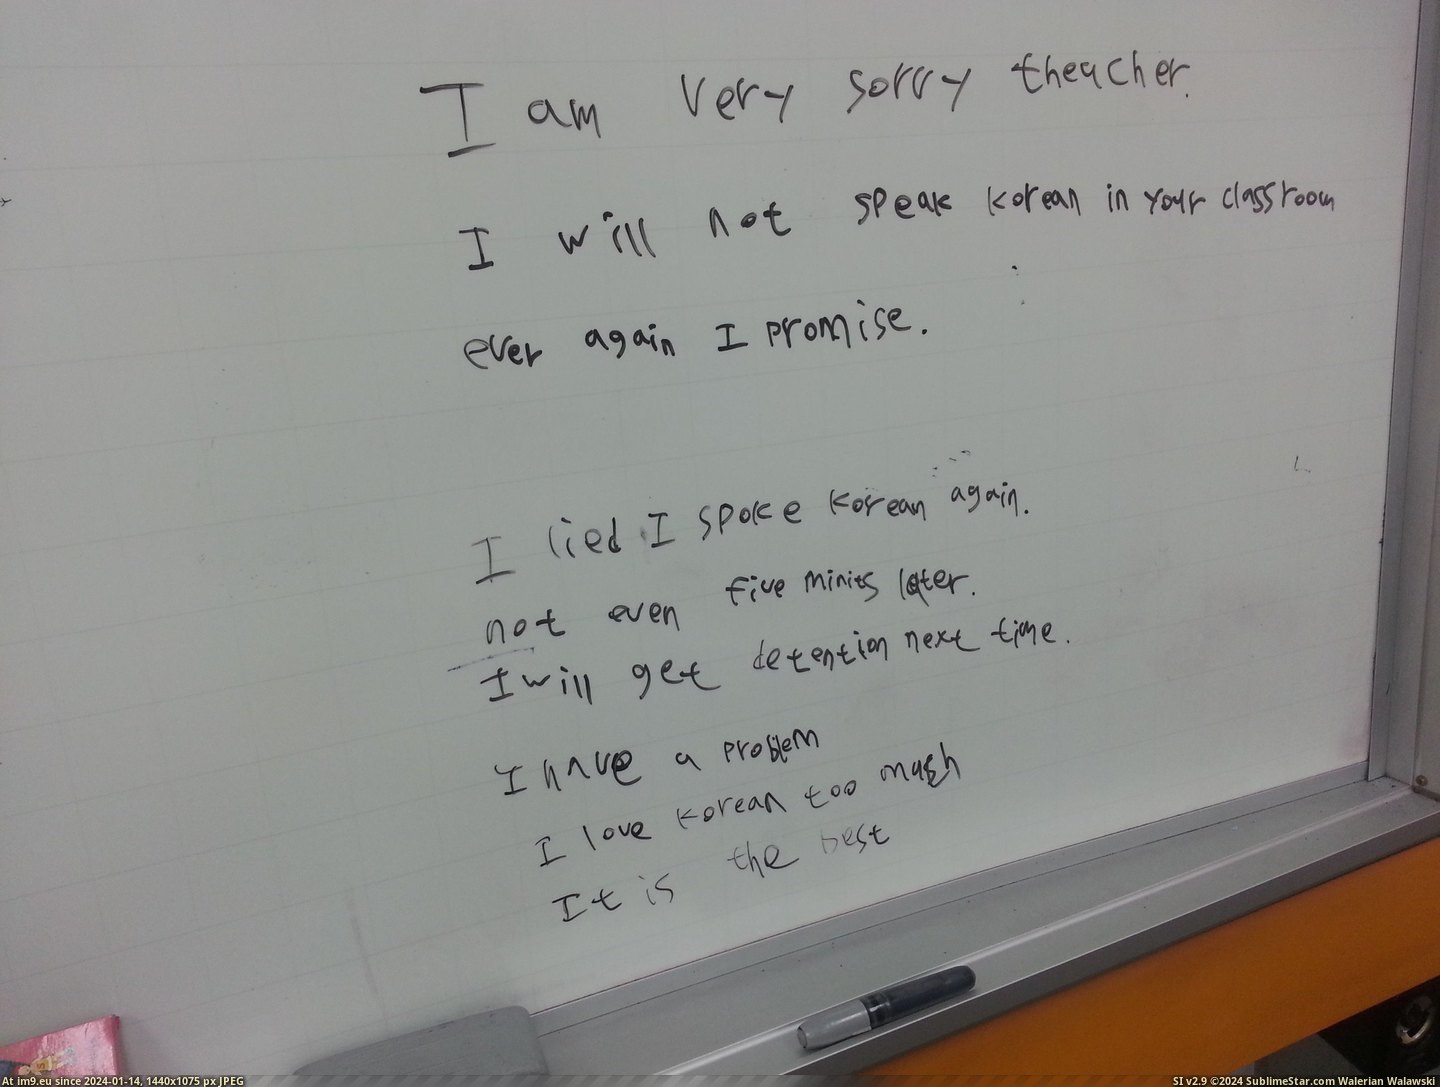 #Funny #Was #Work #School #Stopped #Speaking #Whiteboard #Kids #Class #English #Korean [Funny] I work at a Korean English school where we recently stopped kids from speaking Korean in class. This was my whiteboard t Pic. (Image of album My r/FUNNY favs))